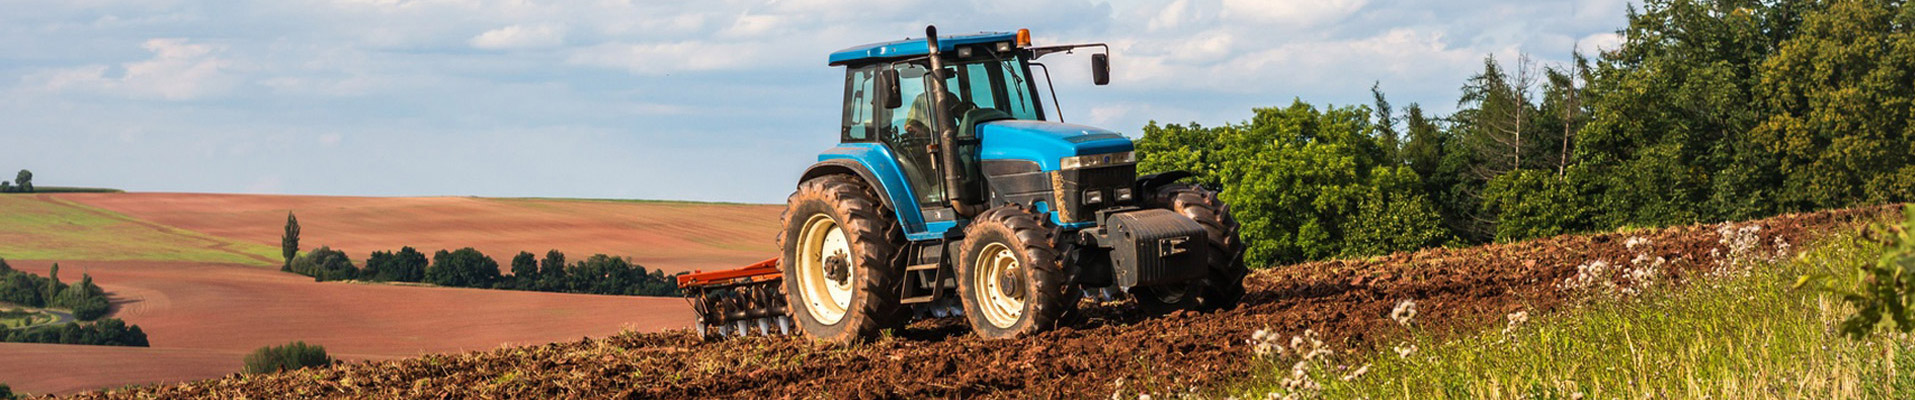 Tractor Image for slider on front page